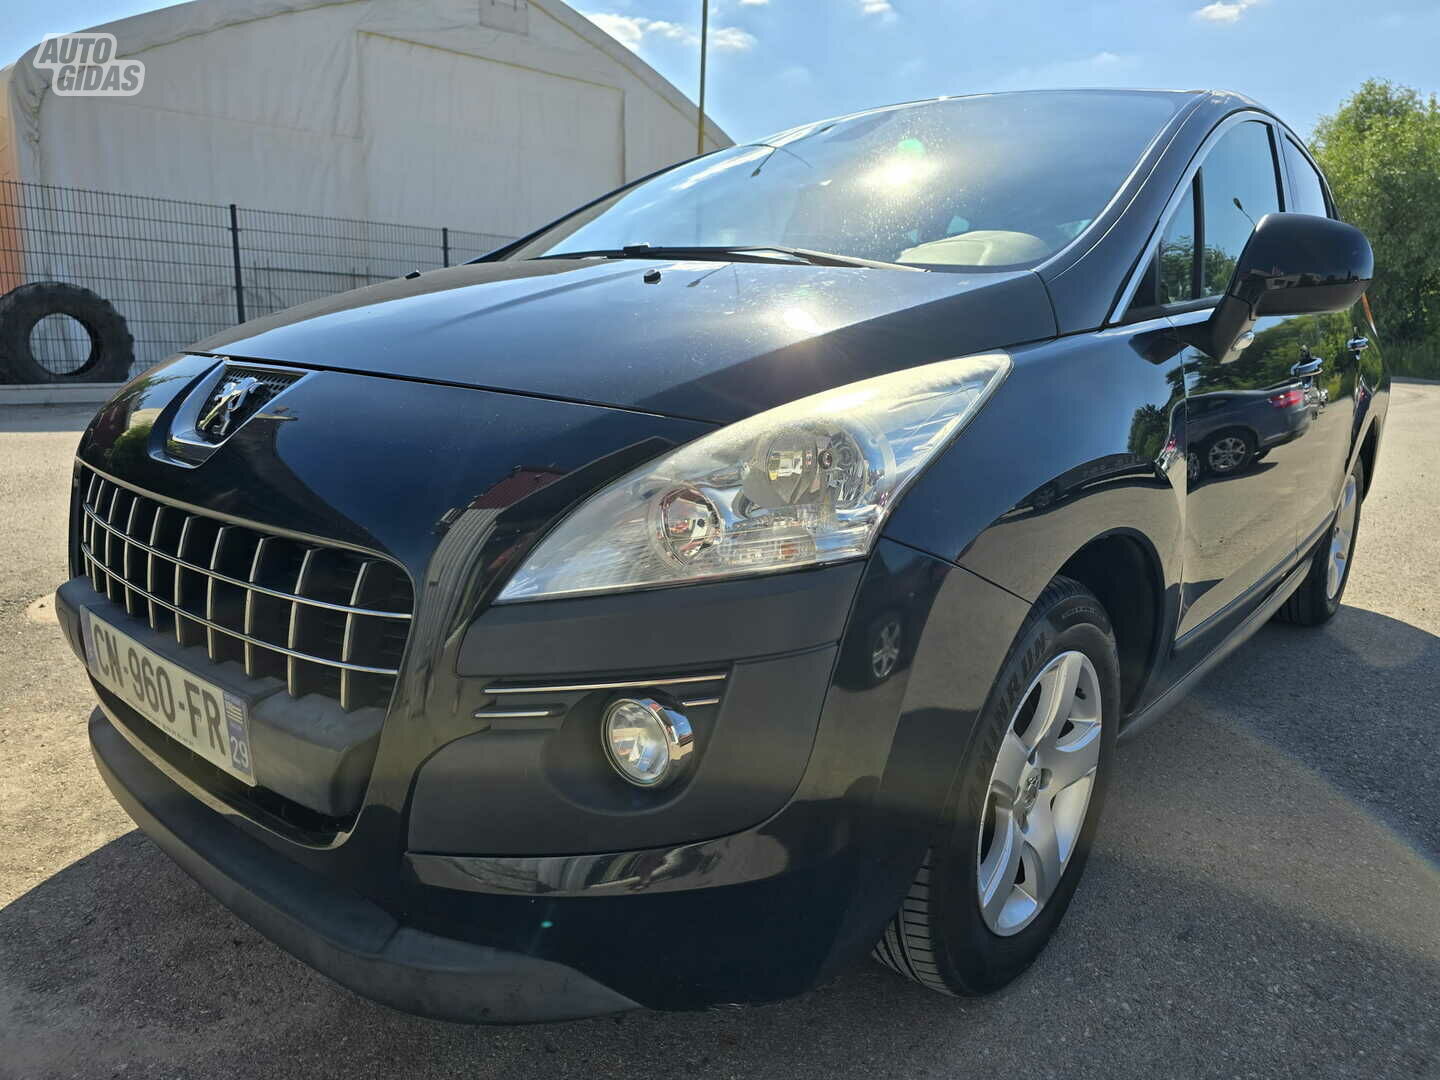 Peugeot 3008 e-HDi Active S&S 2012 y